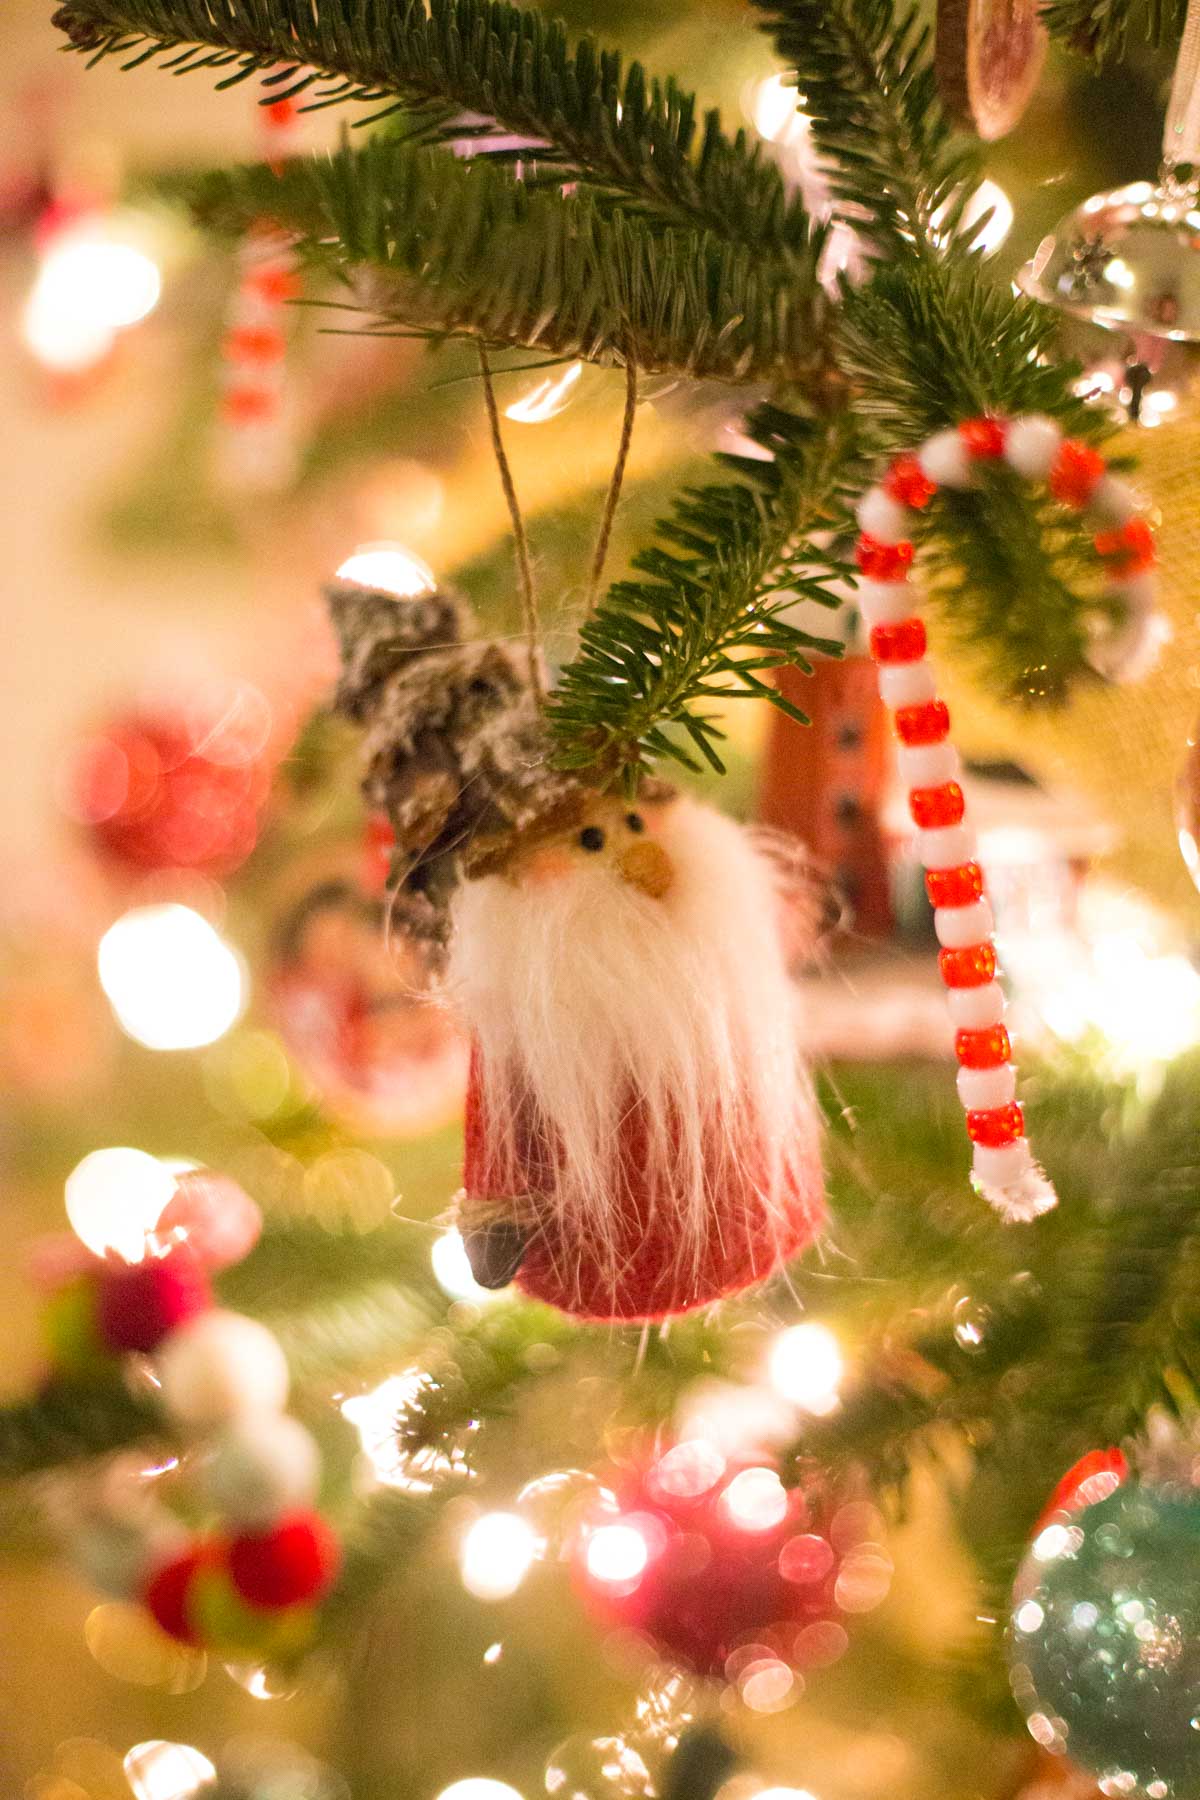 A gnome ornament is hanging on a branch of a Christmas tree.